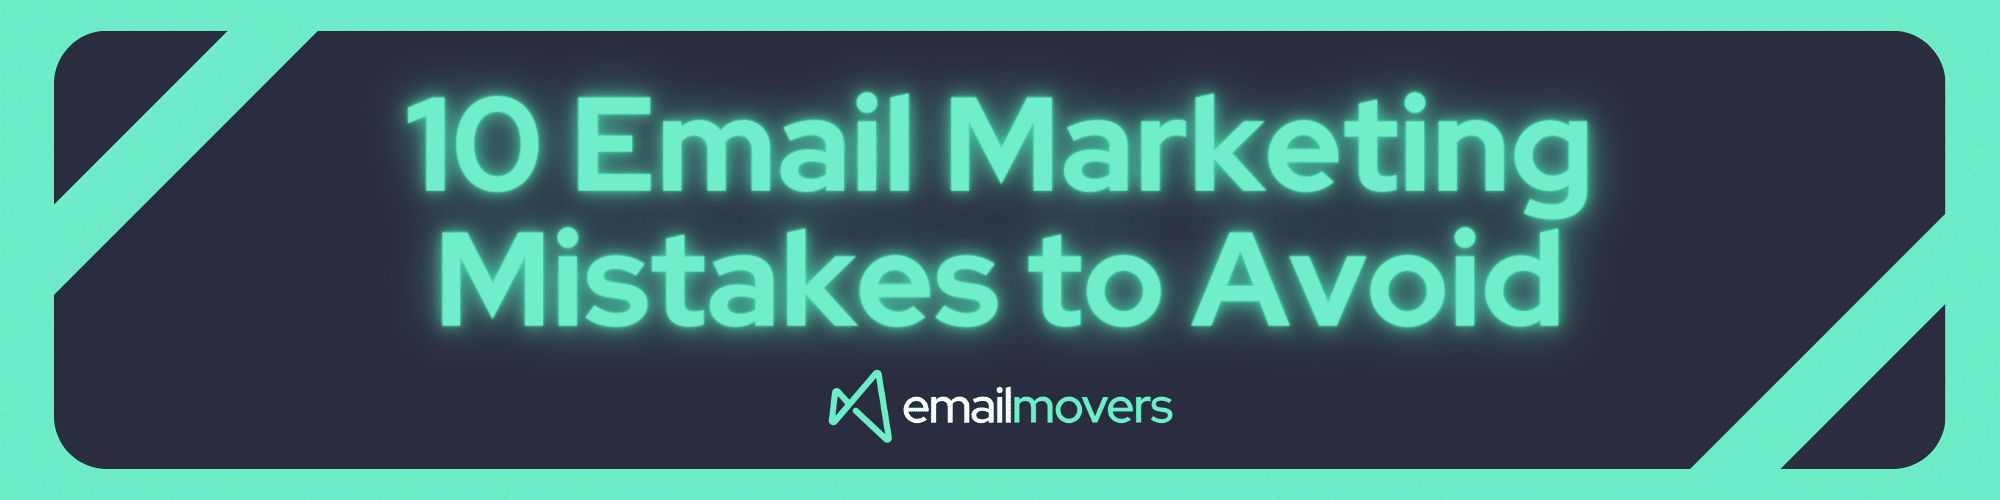 10 Email Marketing Mistakes To Avoid